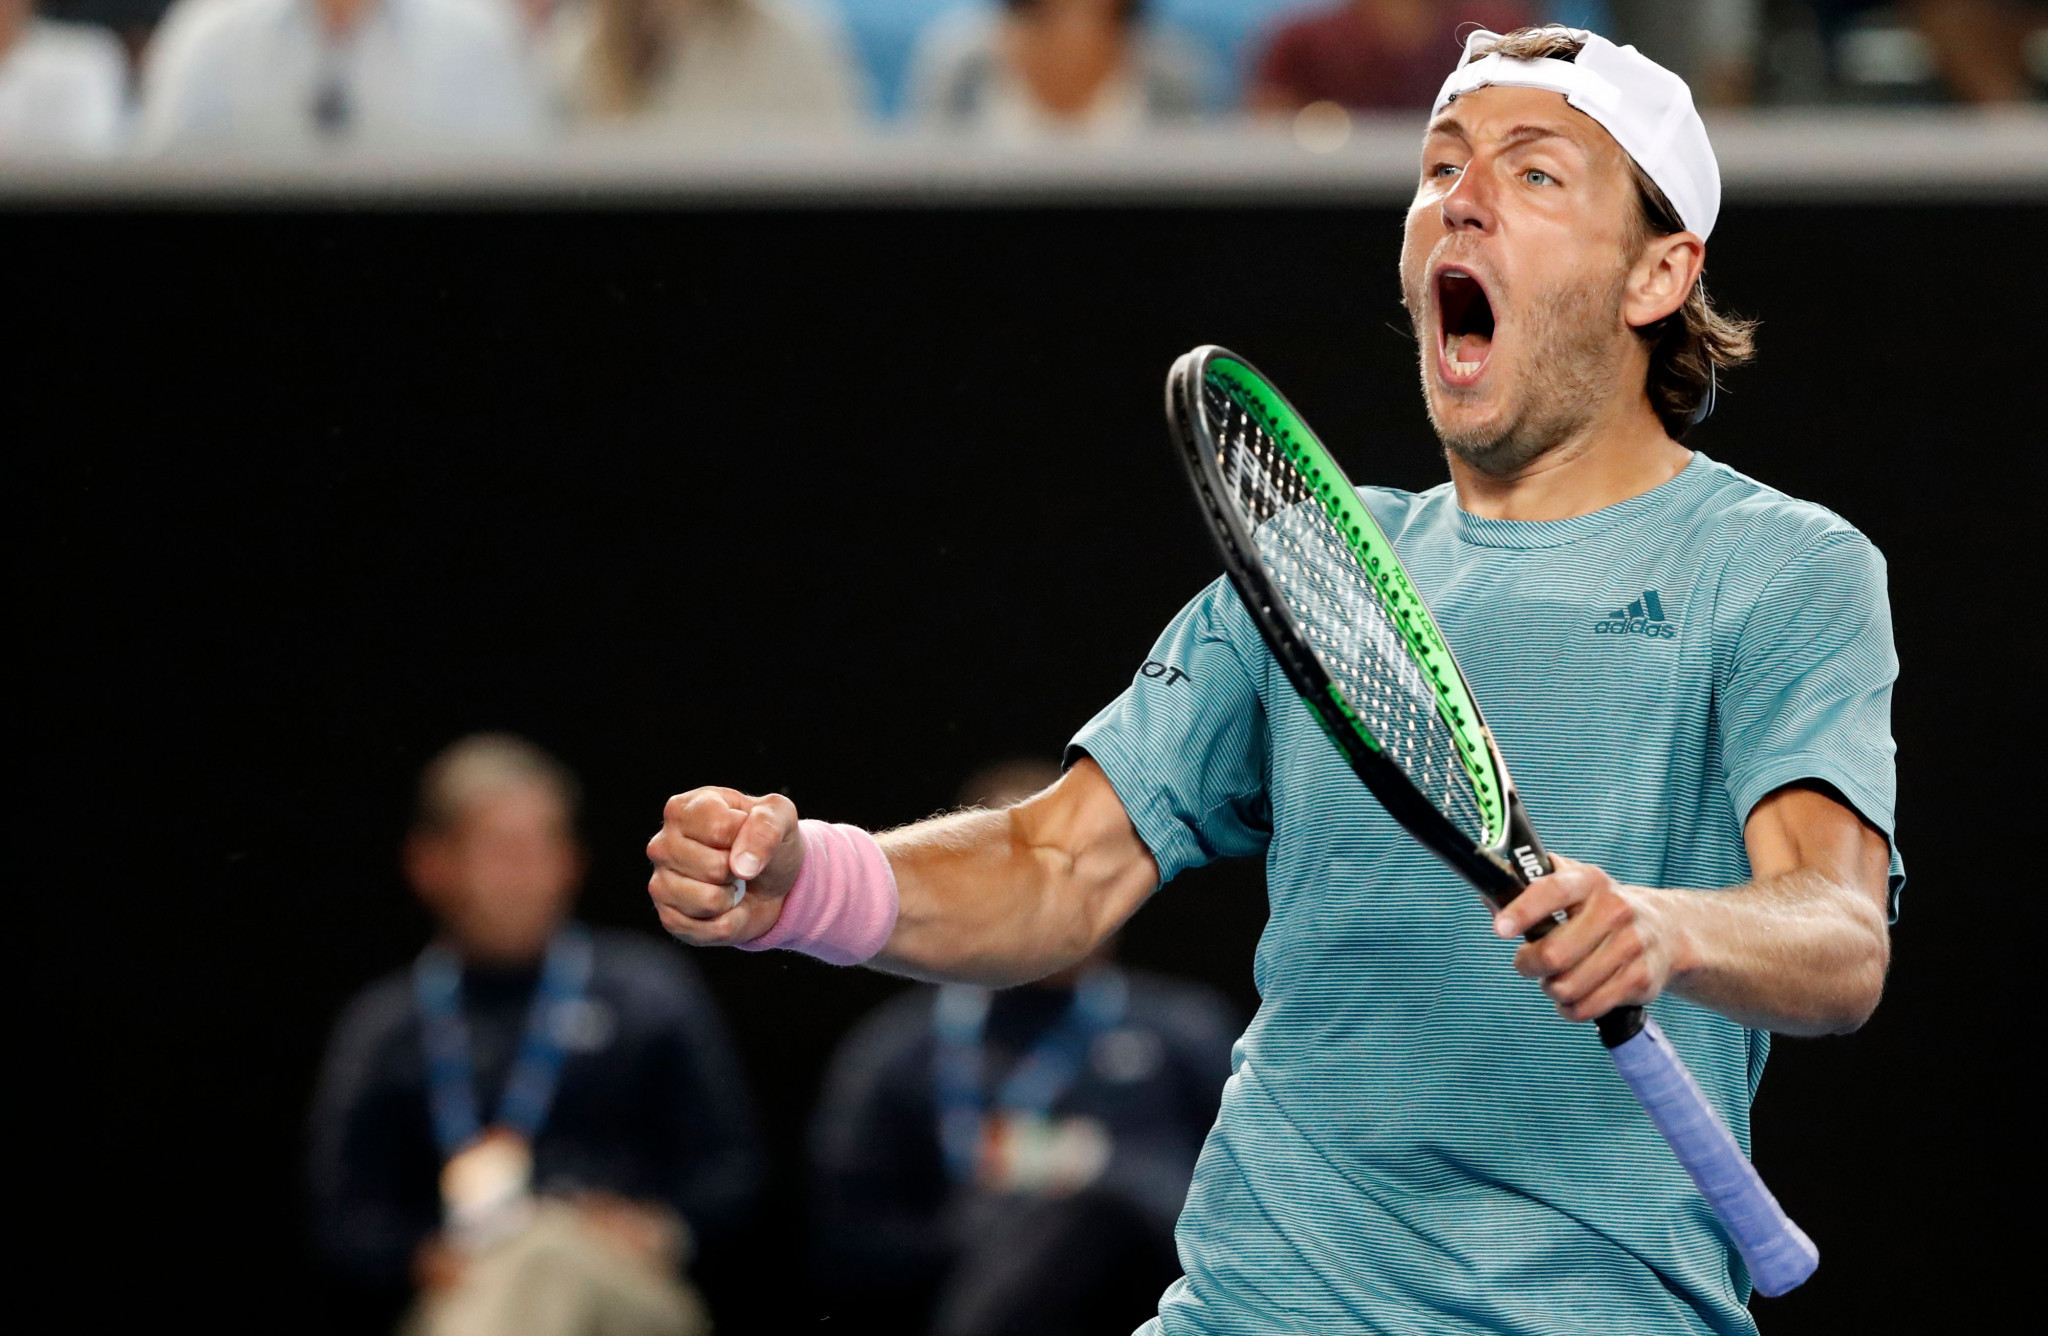 Lucas Pouille responded to beat the home favourite to advance ©Getty Images